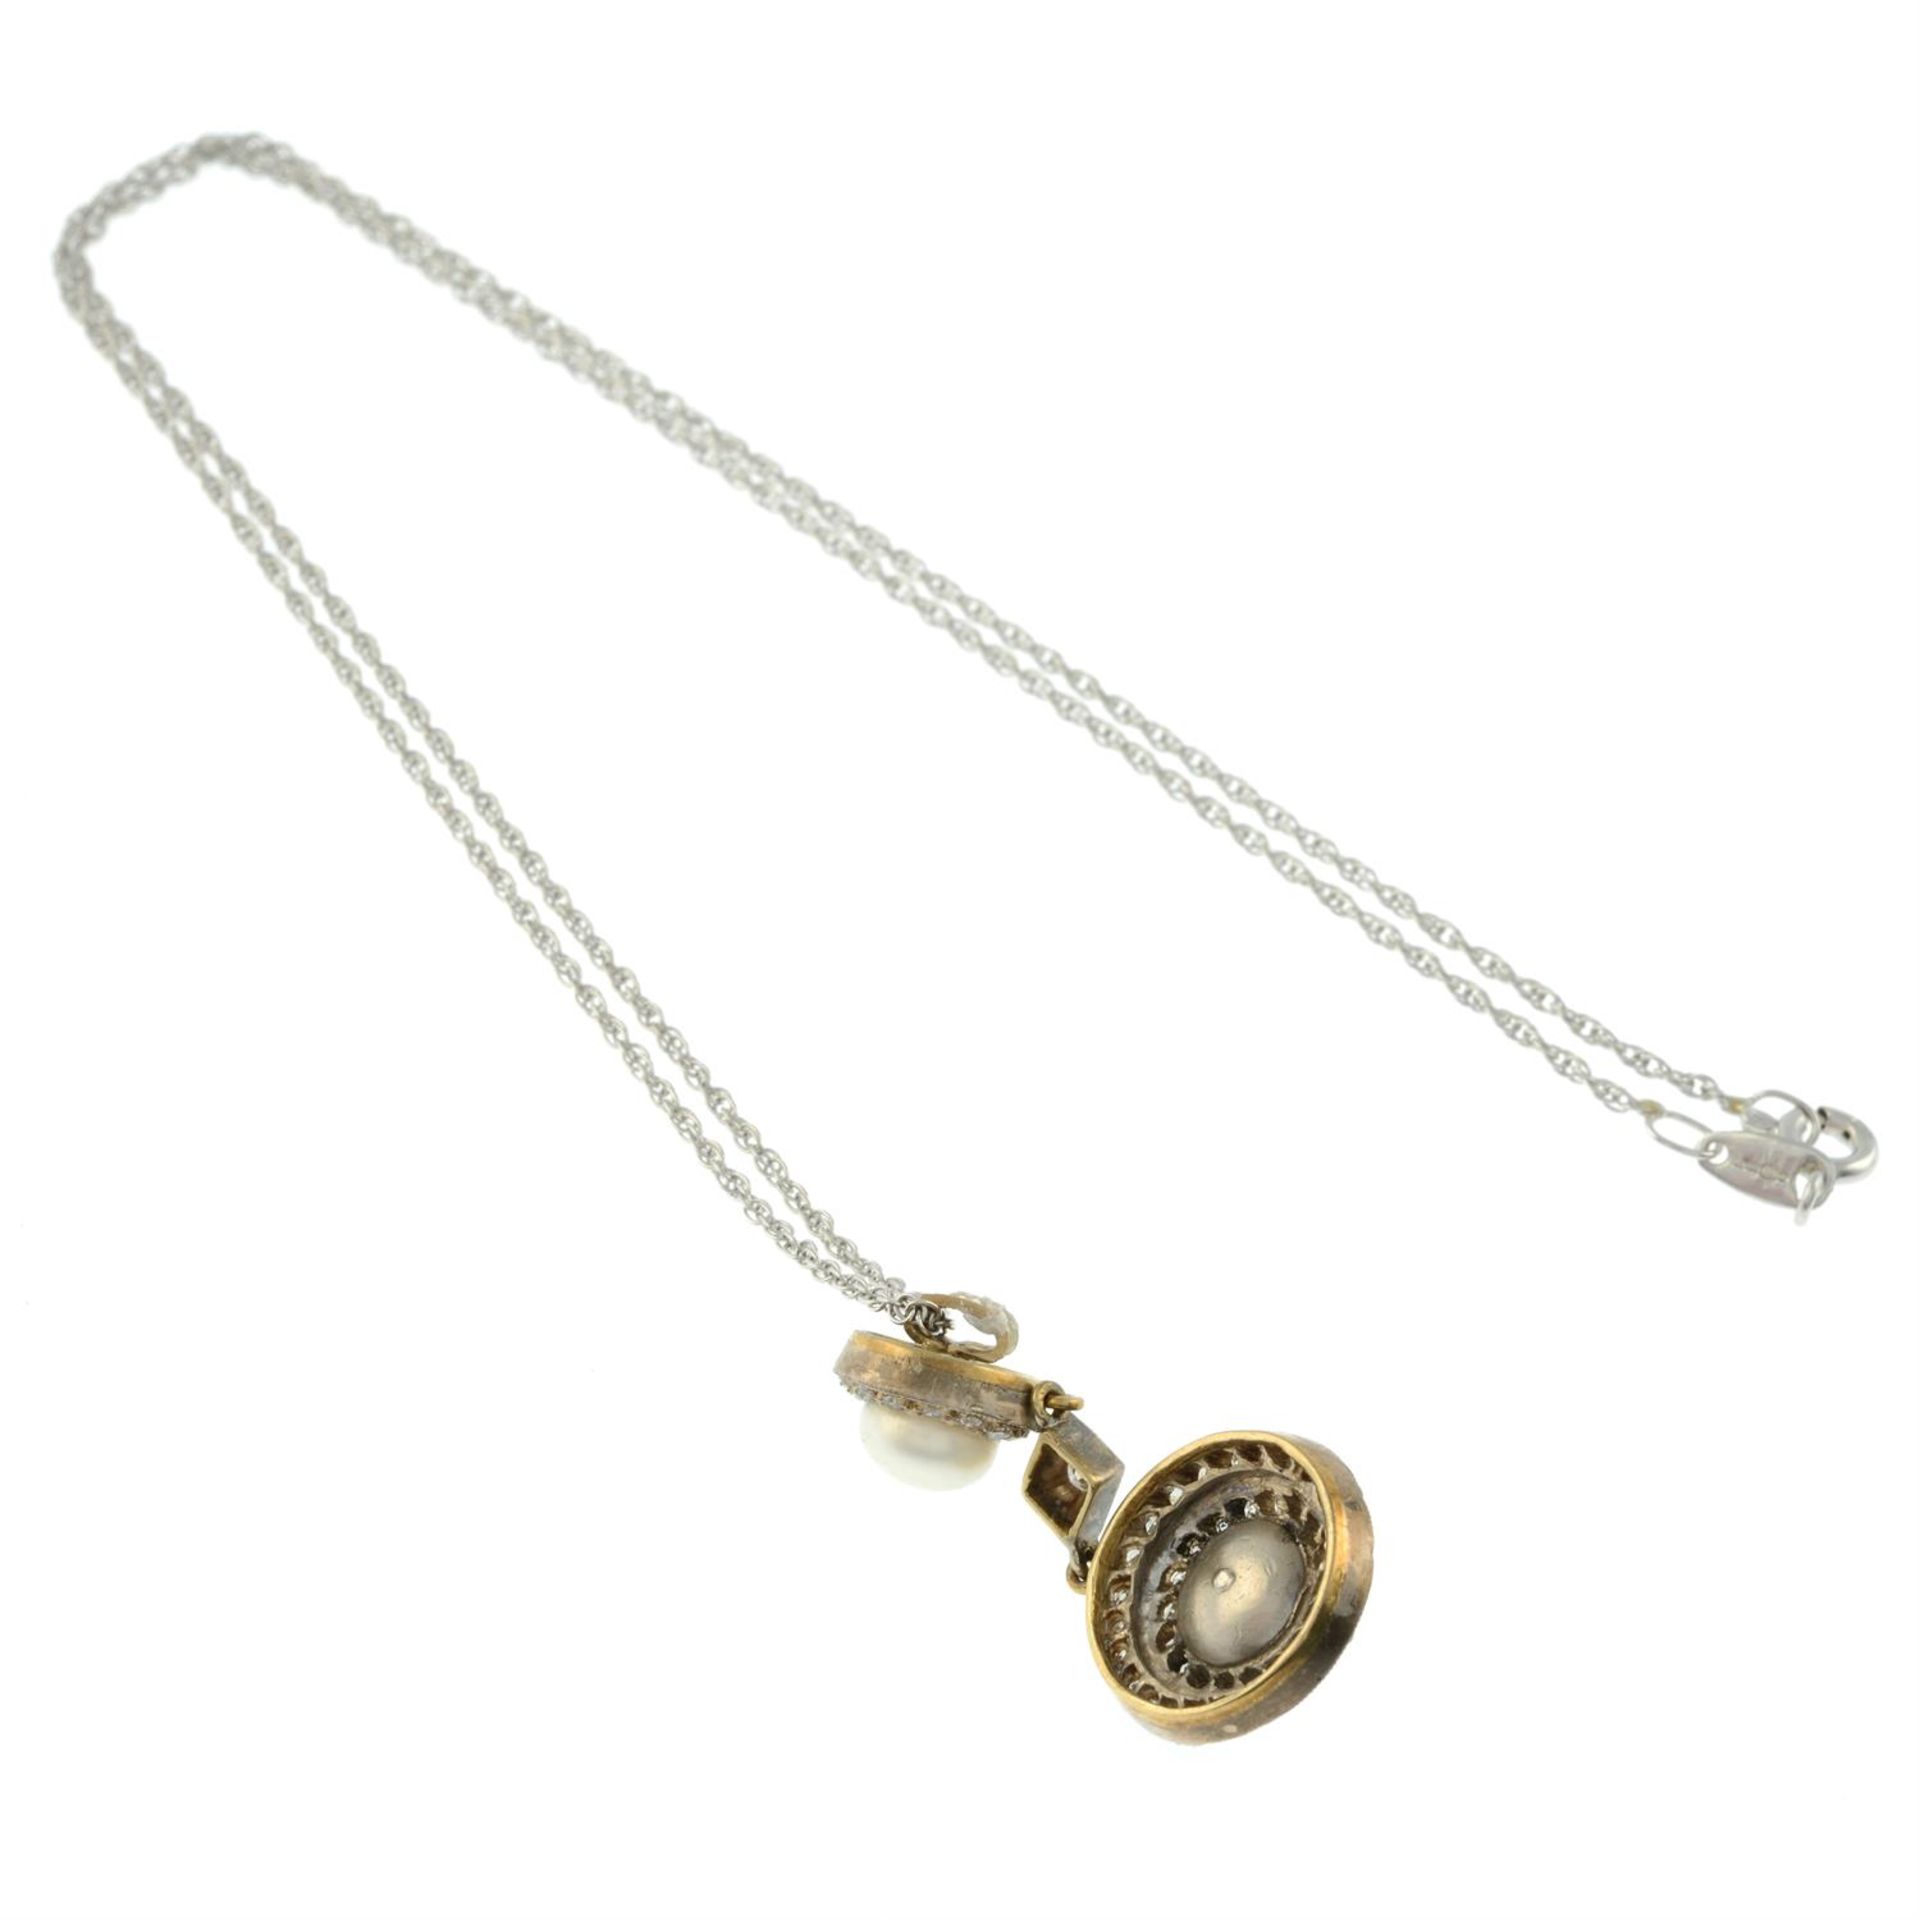 Edwardian silver & gold cultured pearl & diamond pendant, with later 18ct gold chain - Image 3 of 4